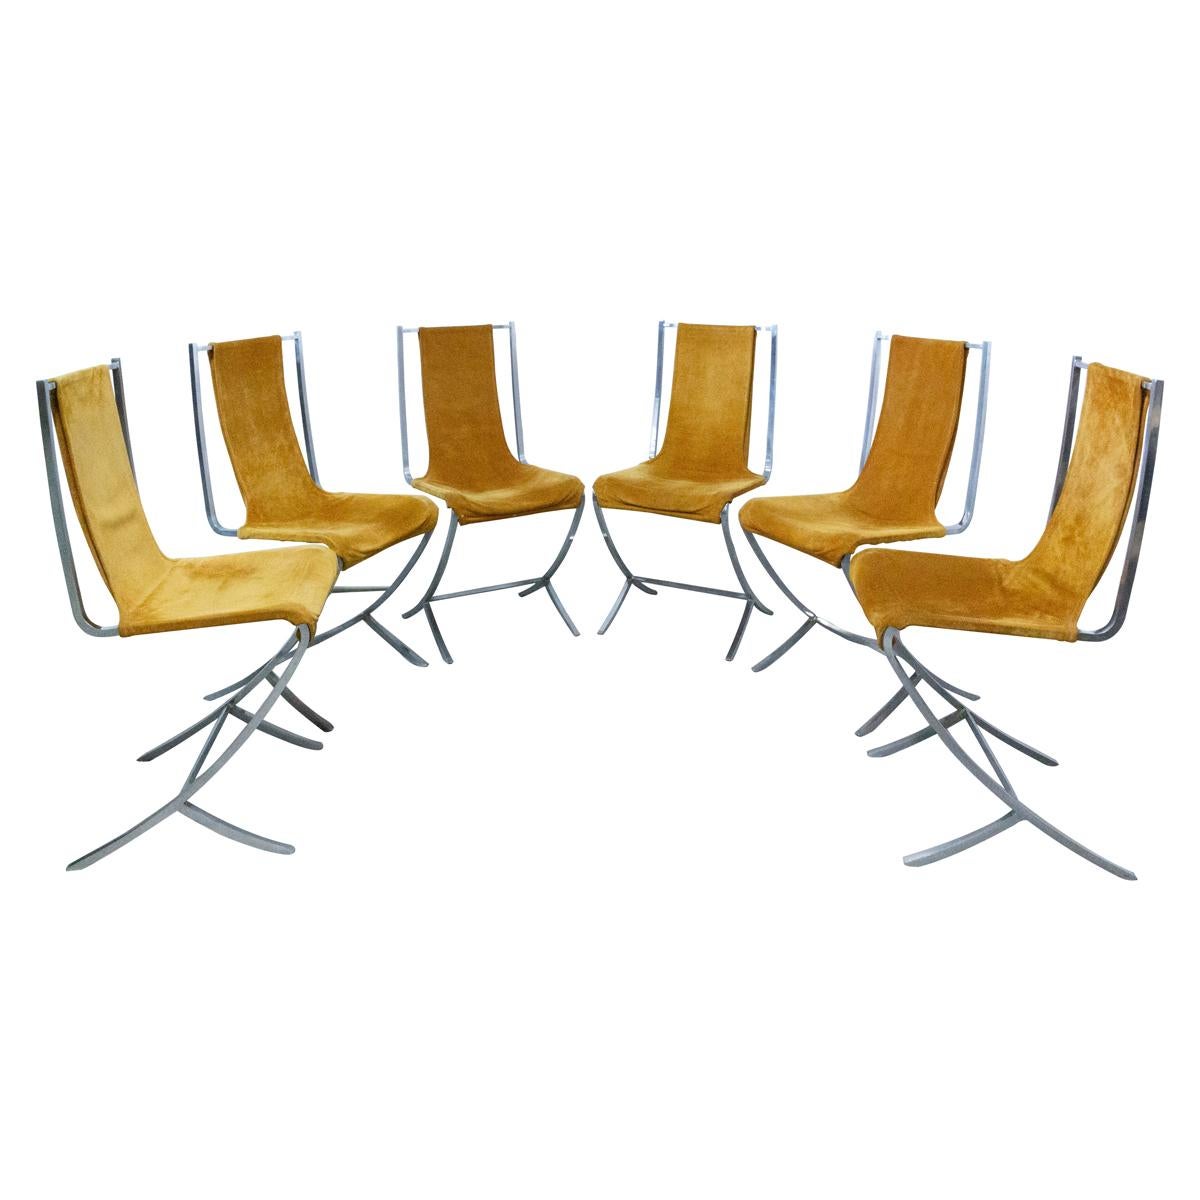 6 Chrome Nubuck Chairs Created by Pierre Cardin for Maison Jansen French c. 1970